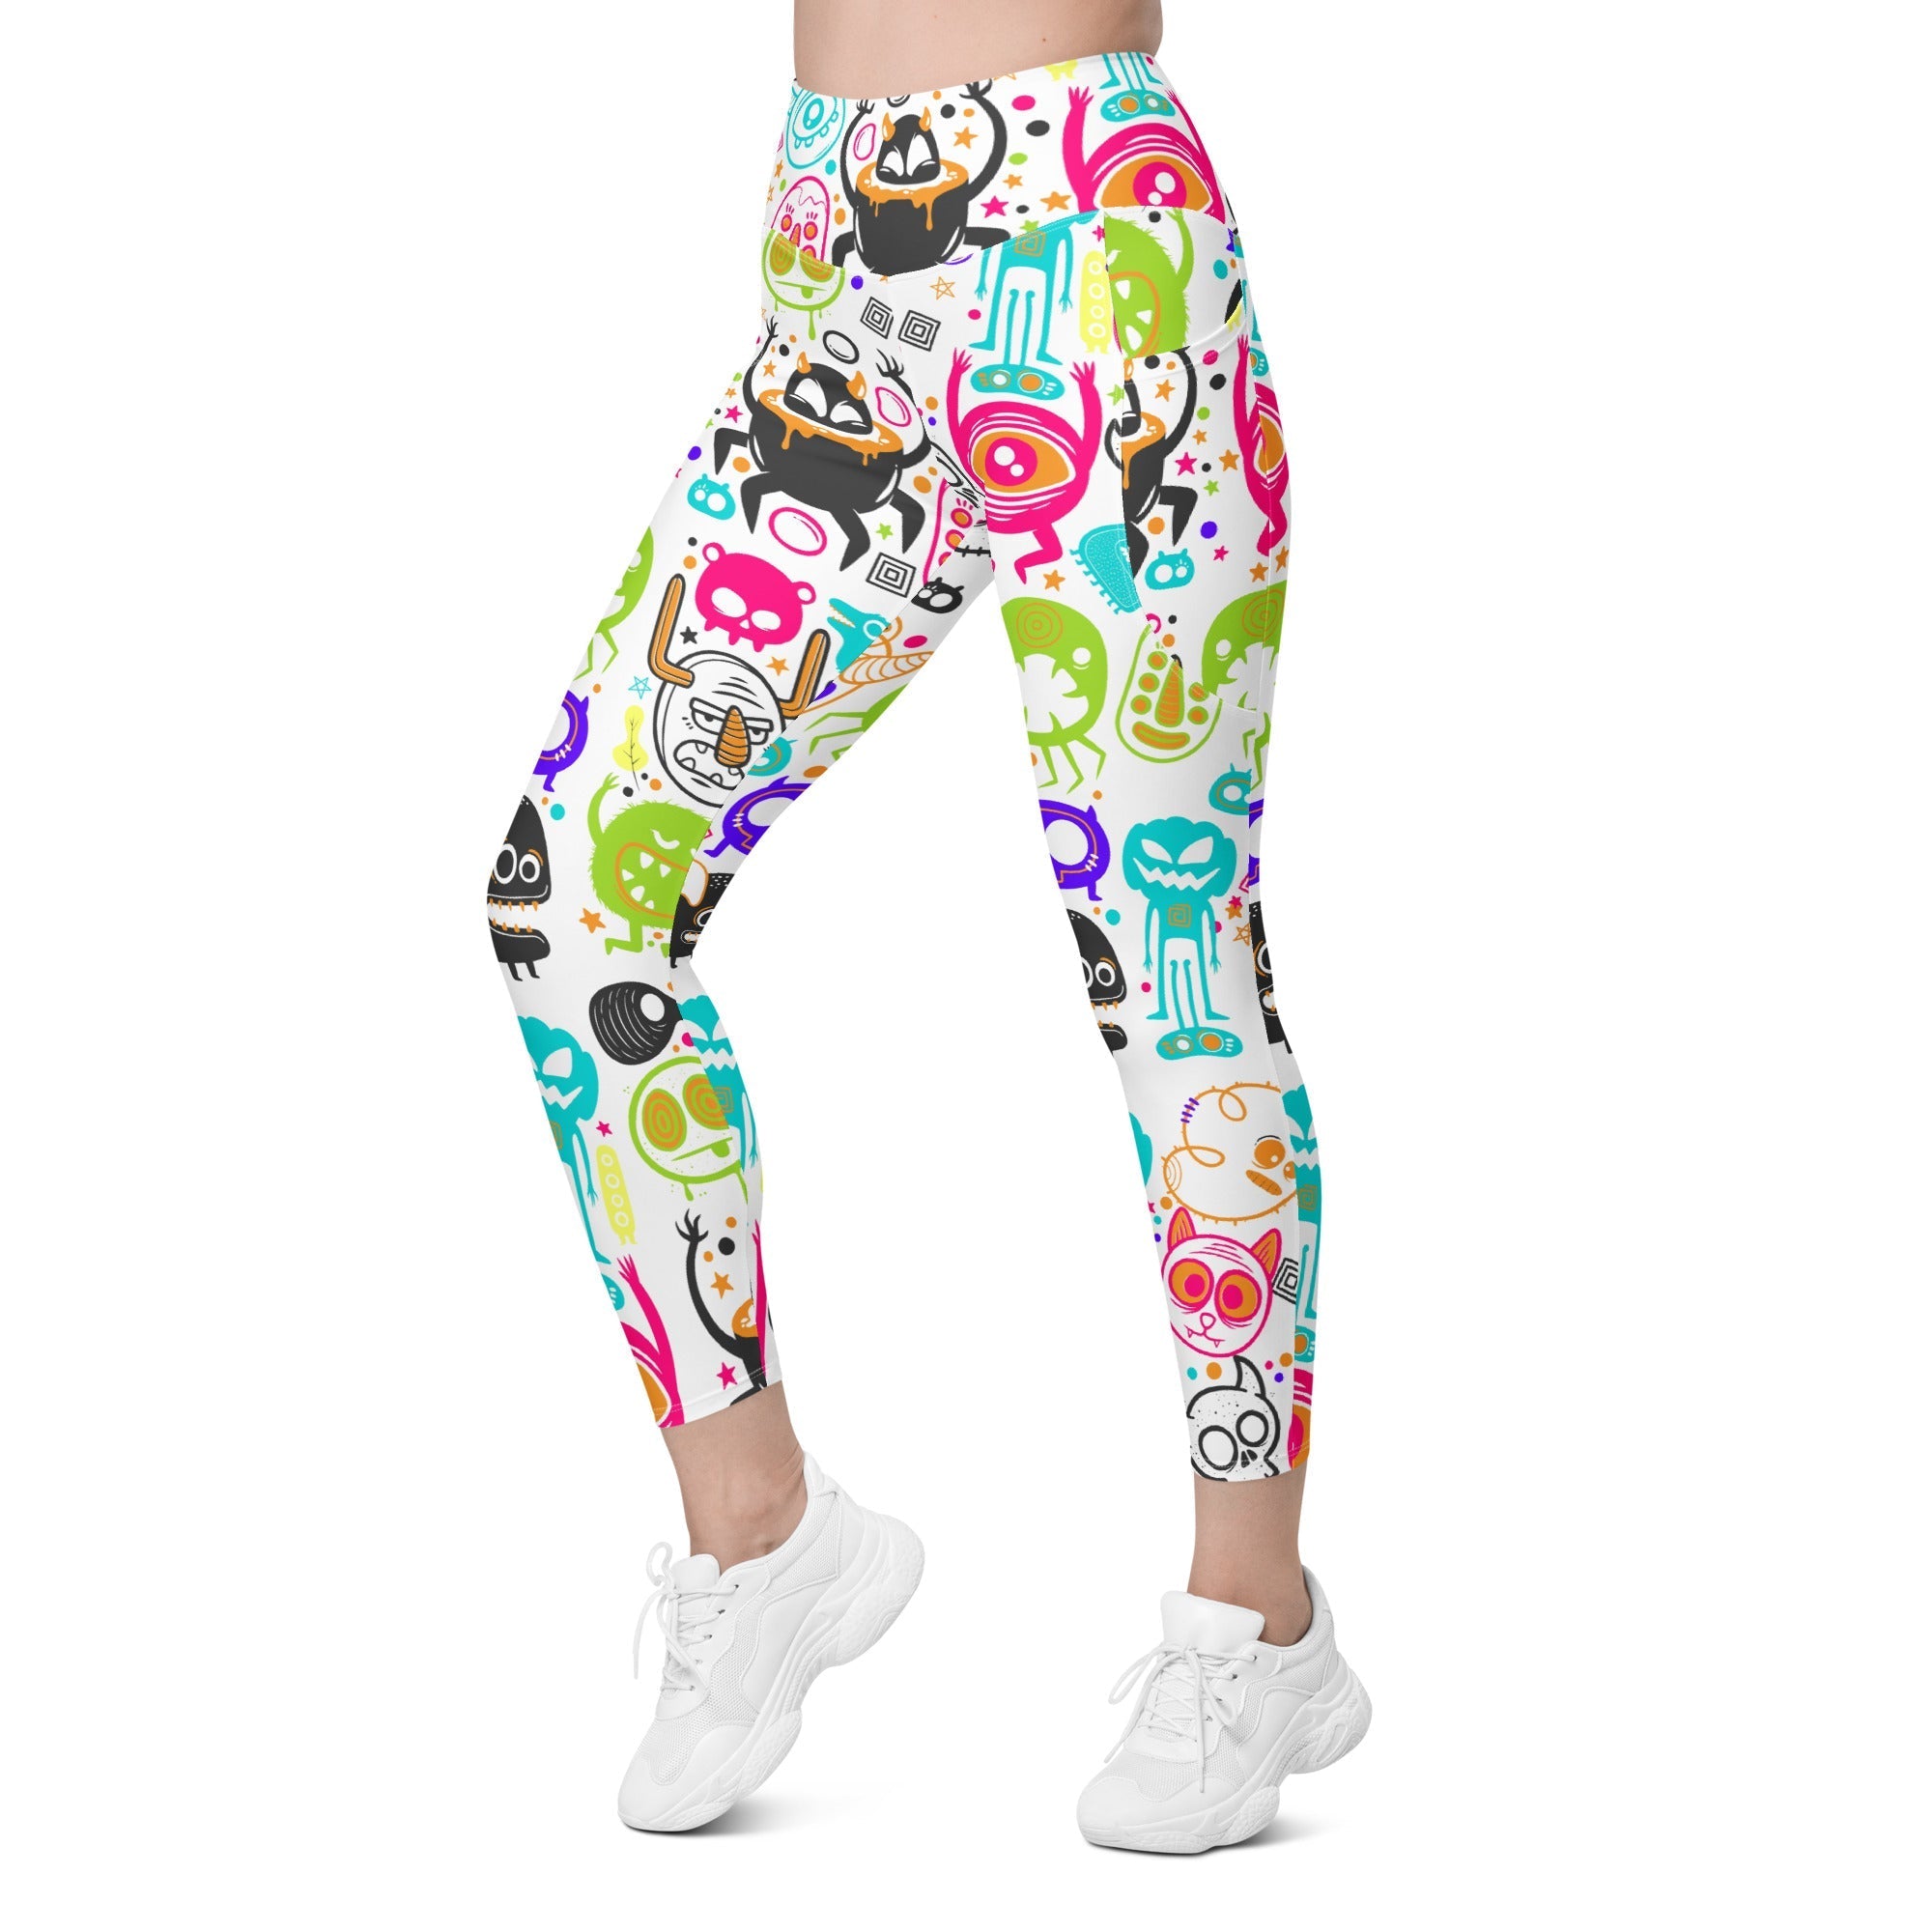 Colorful Doodles Leggings With Pockets